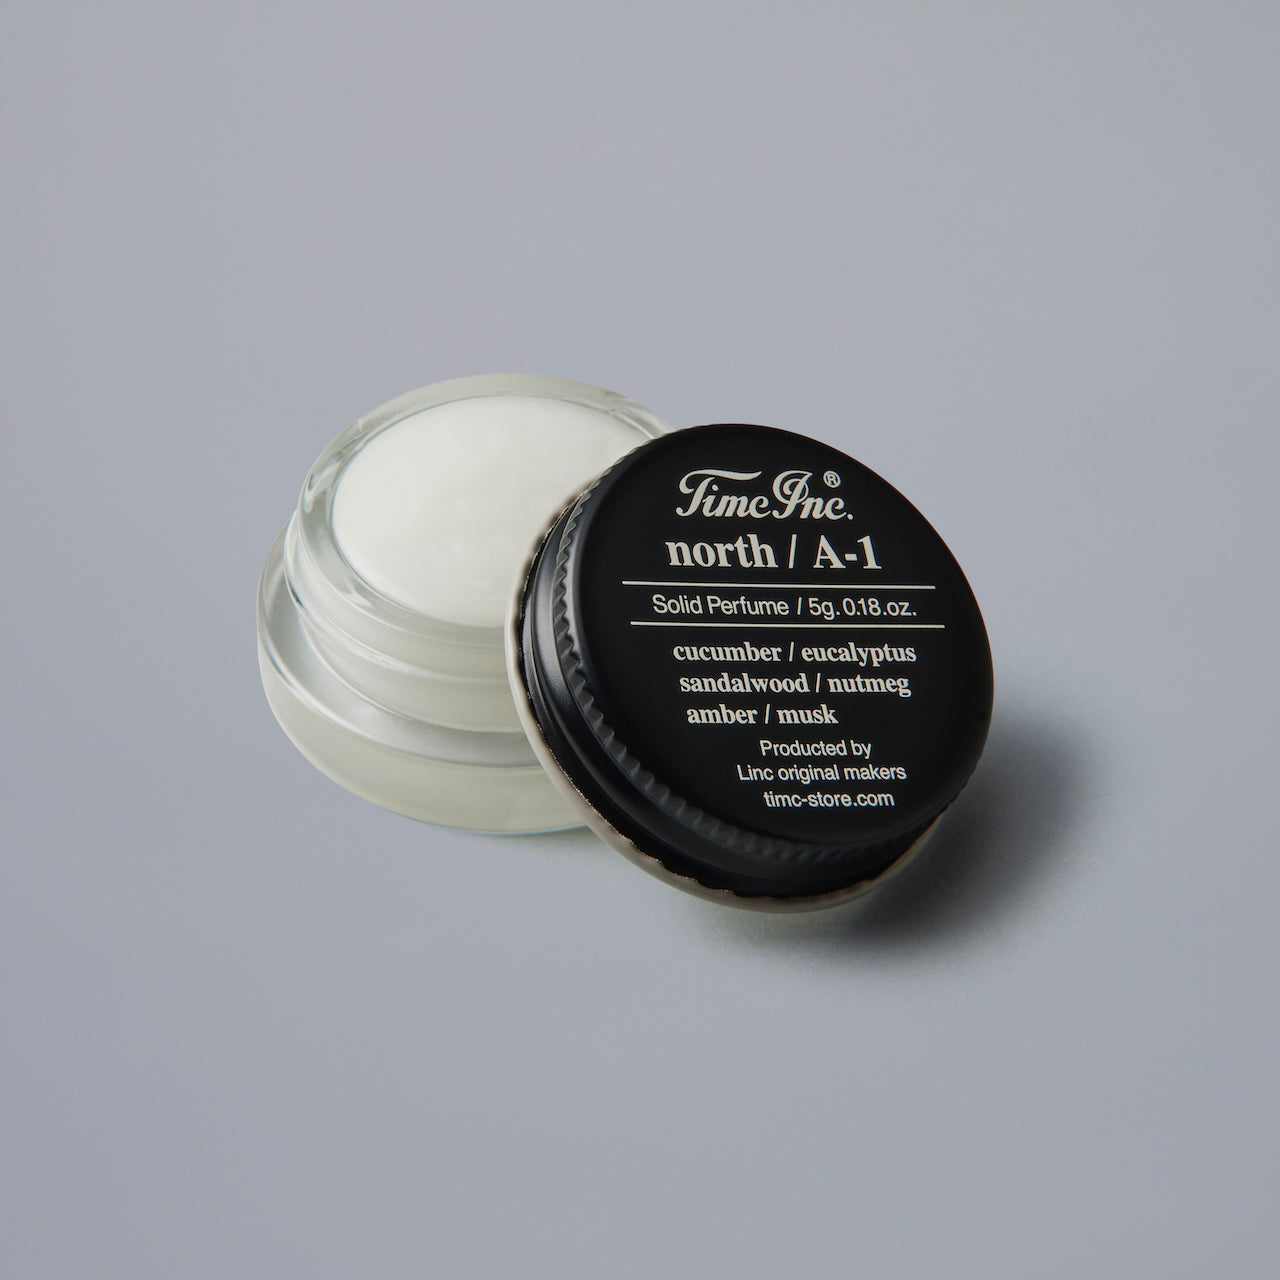 Solid Perfume north / A-1